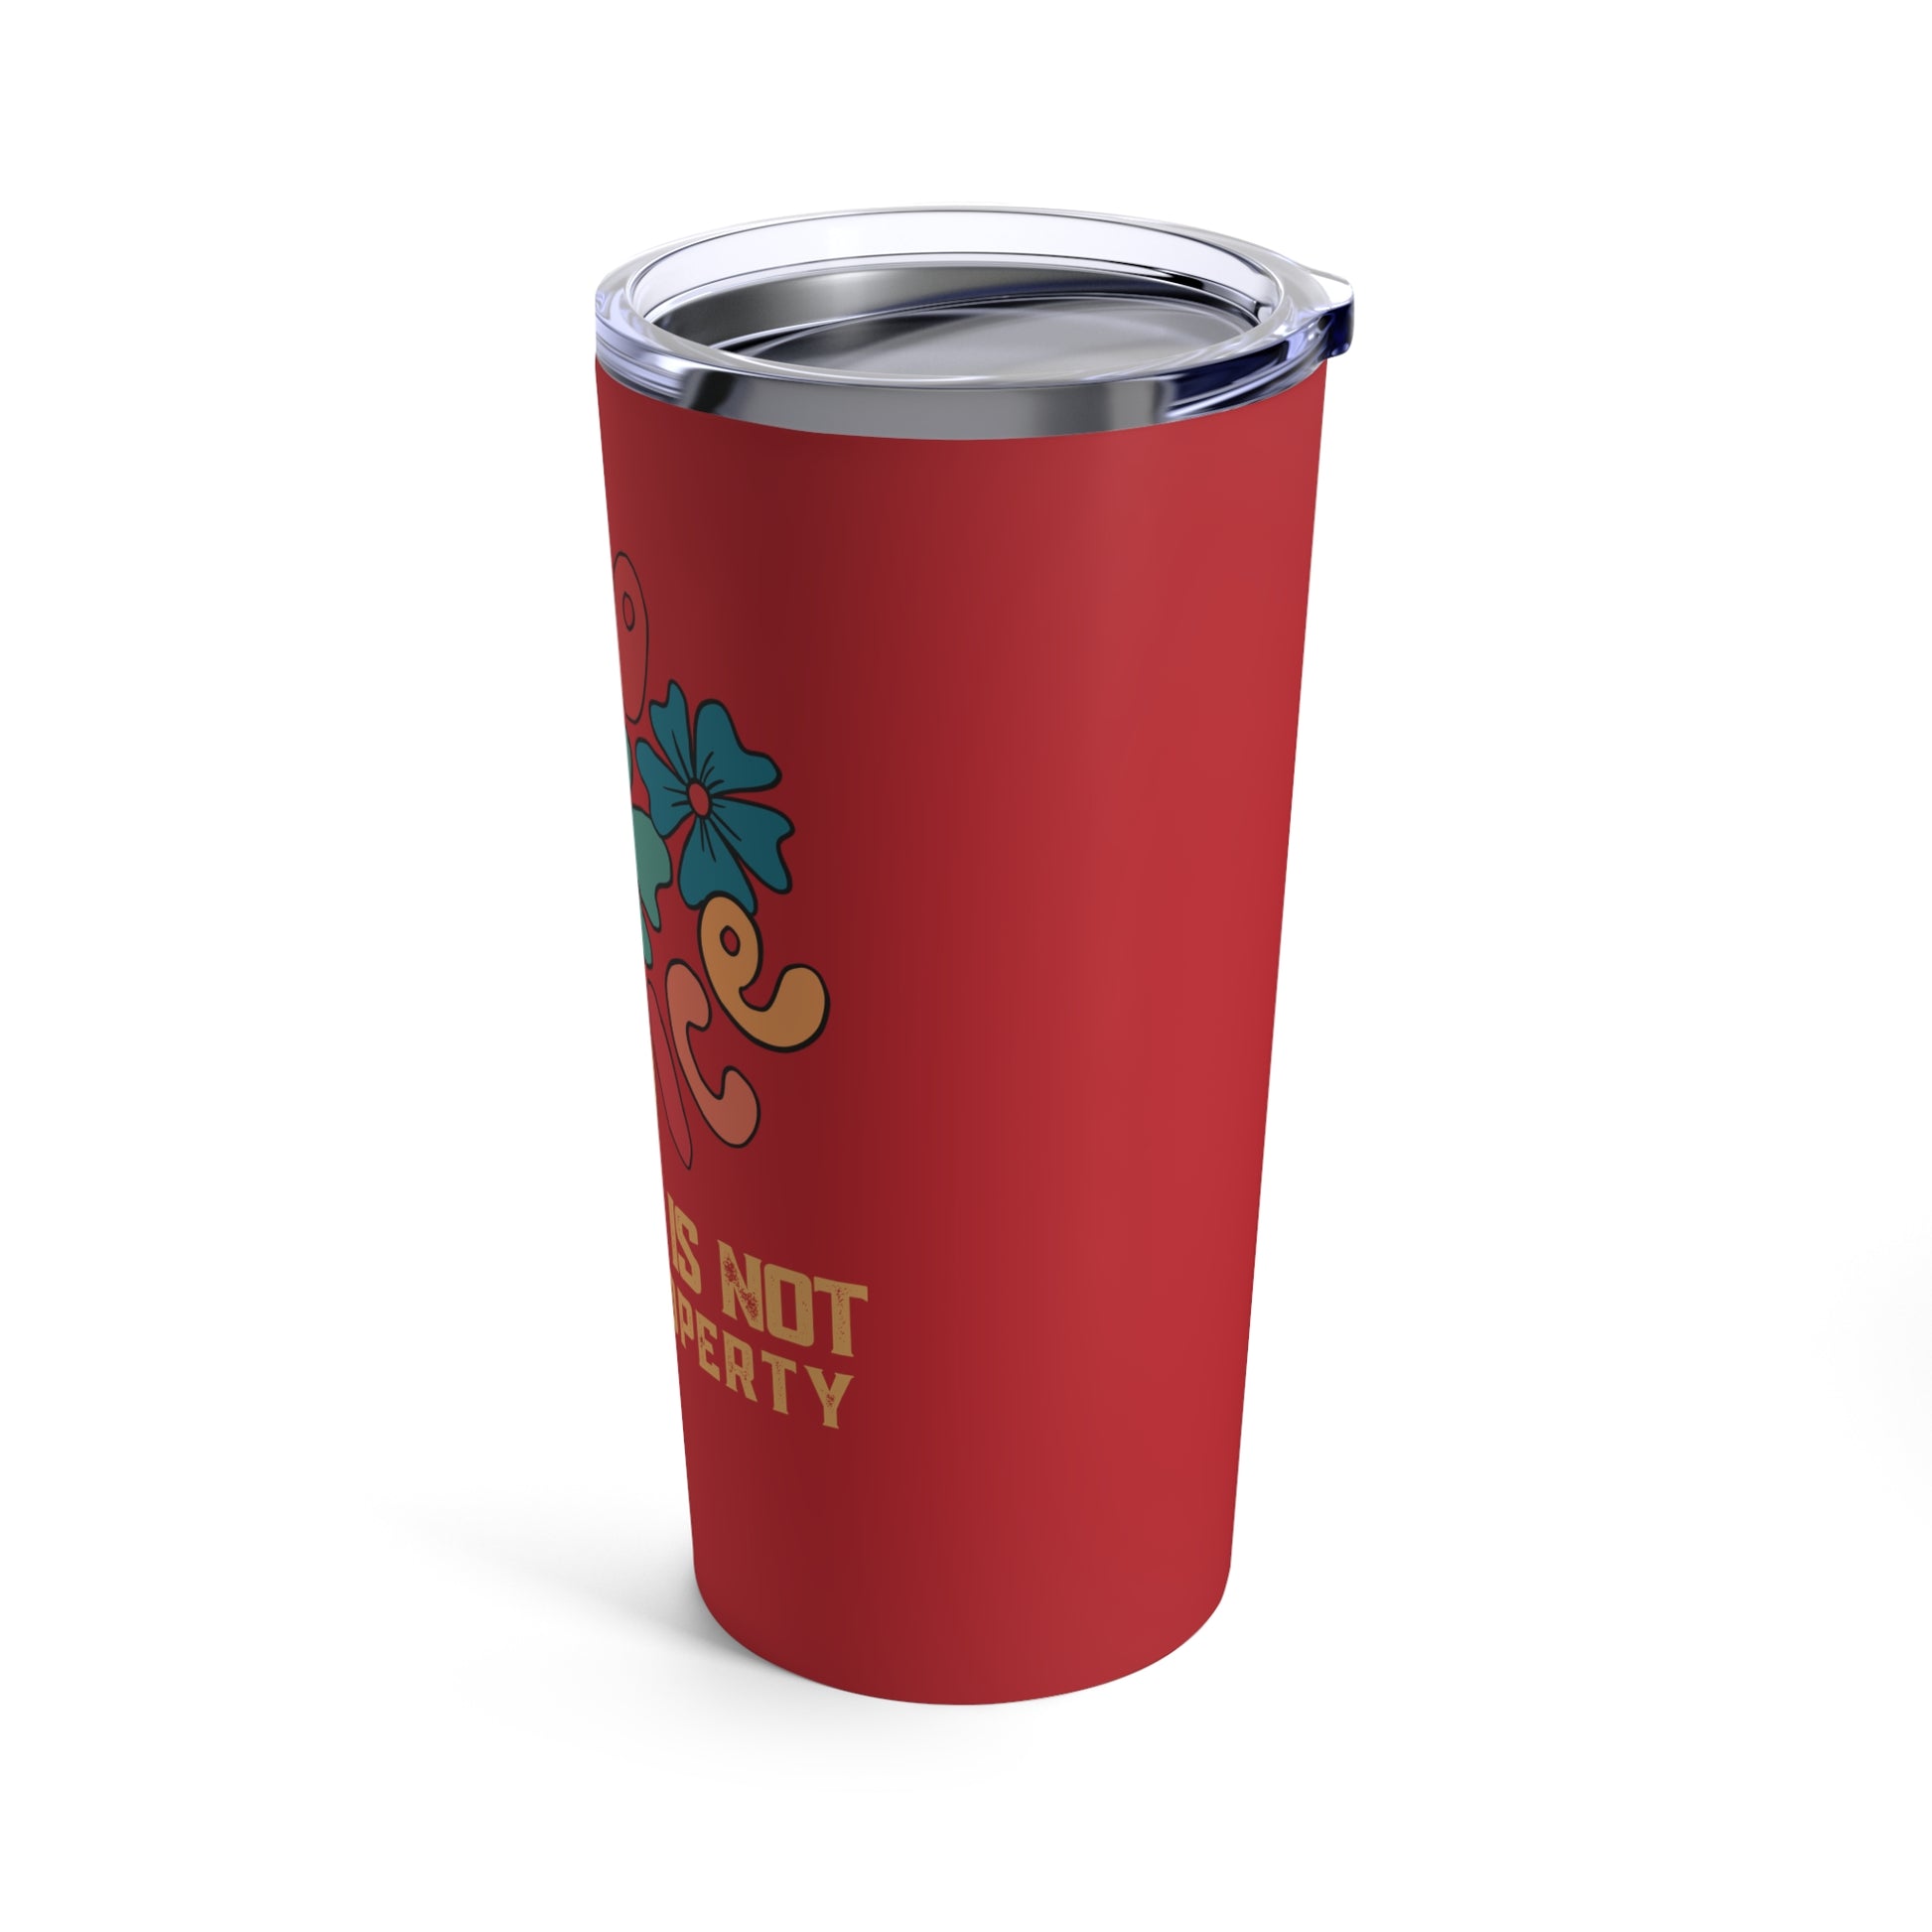 Gift idea for pro Roe V Wade advocate. Stainless steel tumbler with clear lid and a convicting message supporting women's rights and safe and legal access to abortion care.